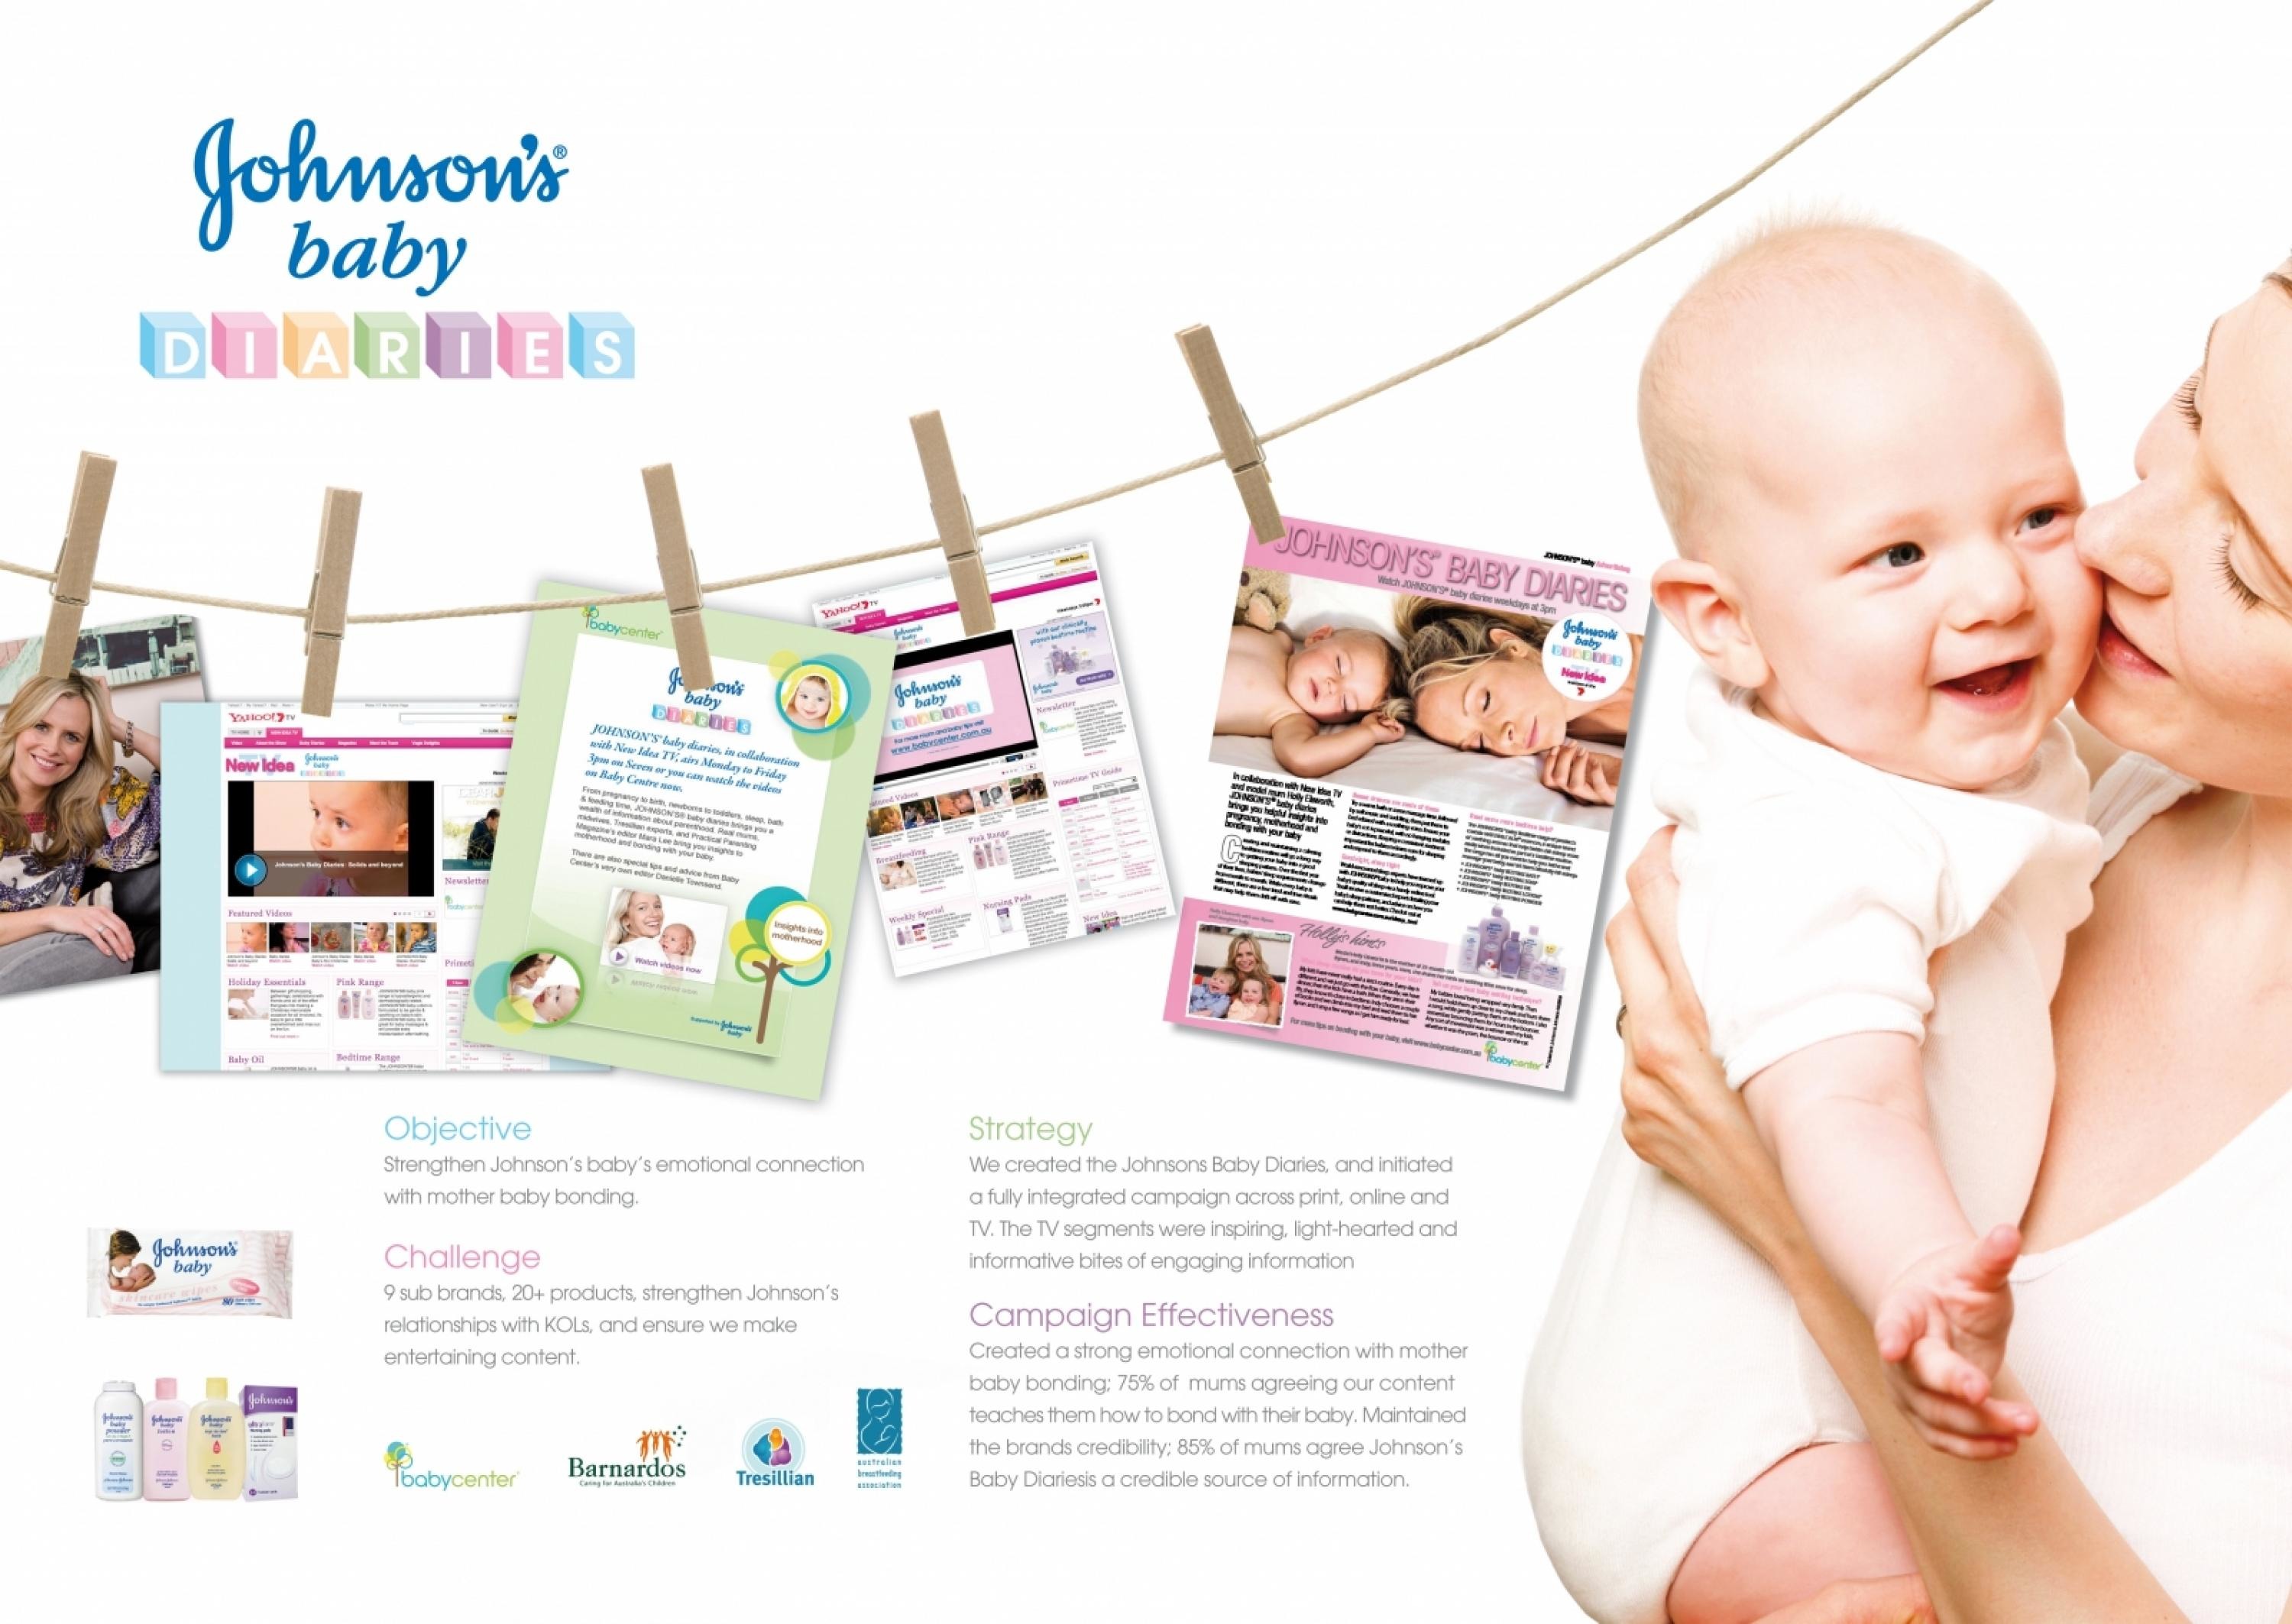 JOHNSON'S BABY PRODUCTS